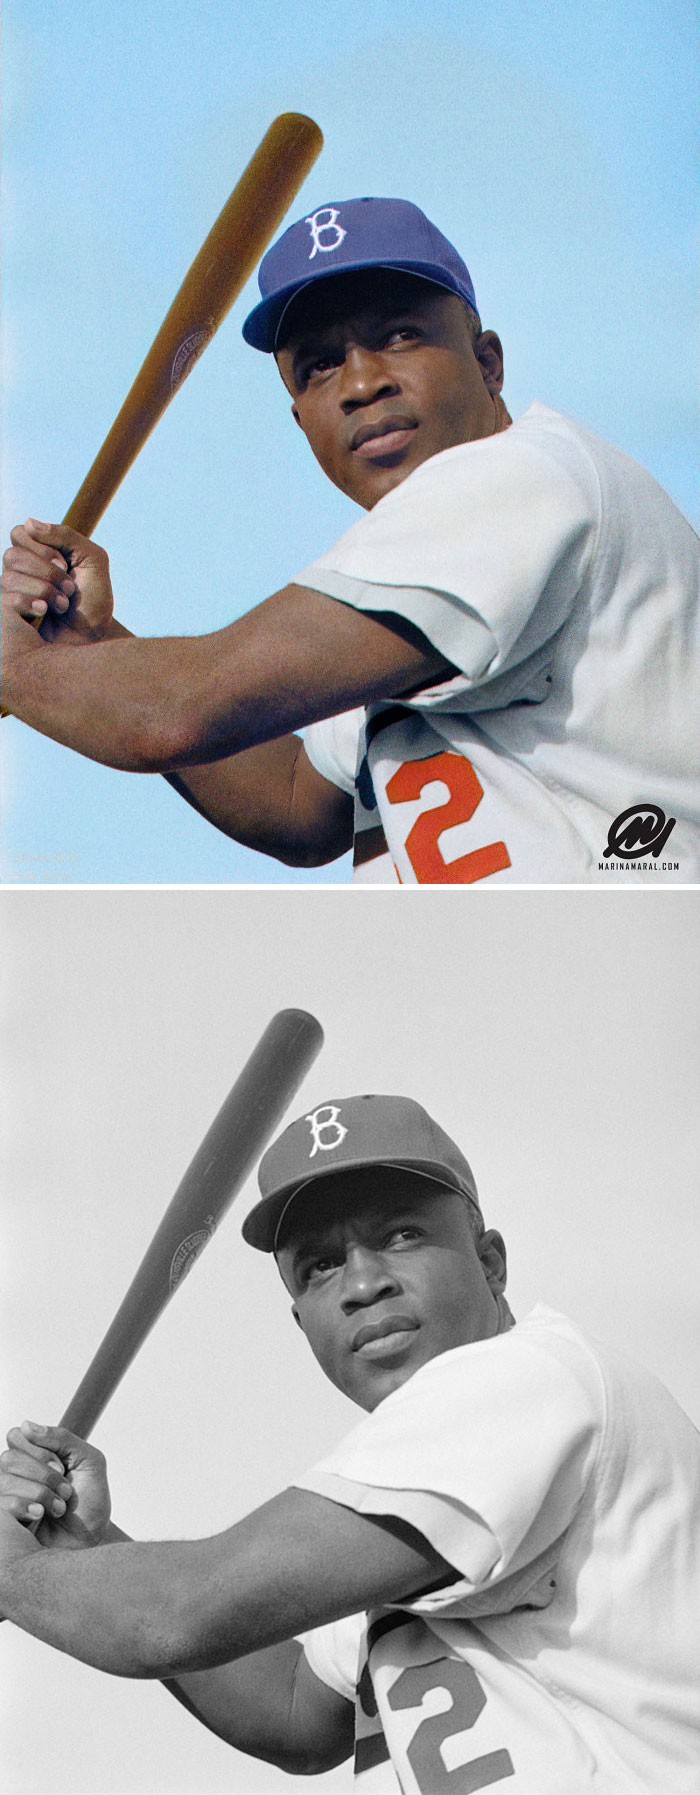 Jackie Robinson Of The Brooklyn Dodgers, Posed And Ready To Swing - 1 January 1954